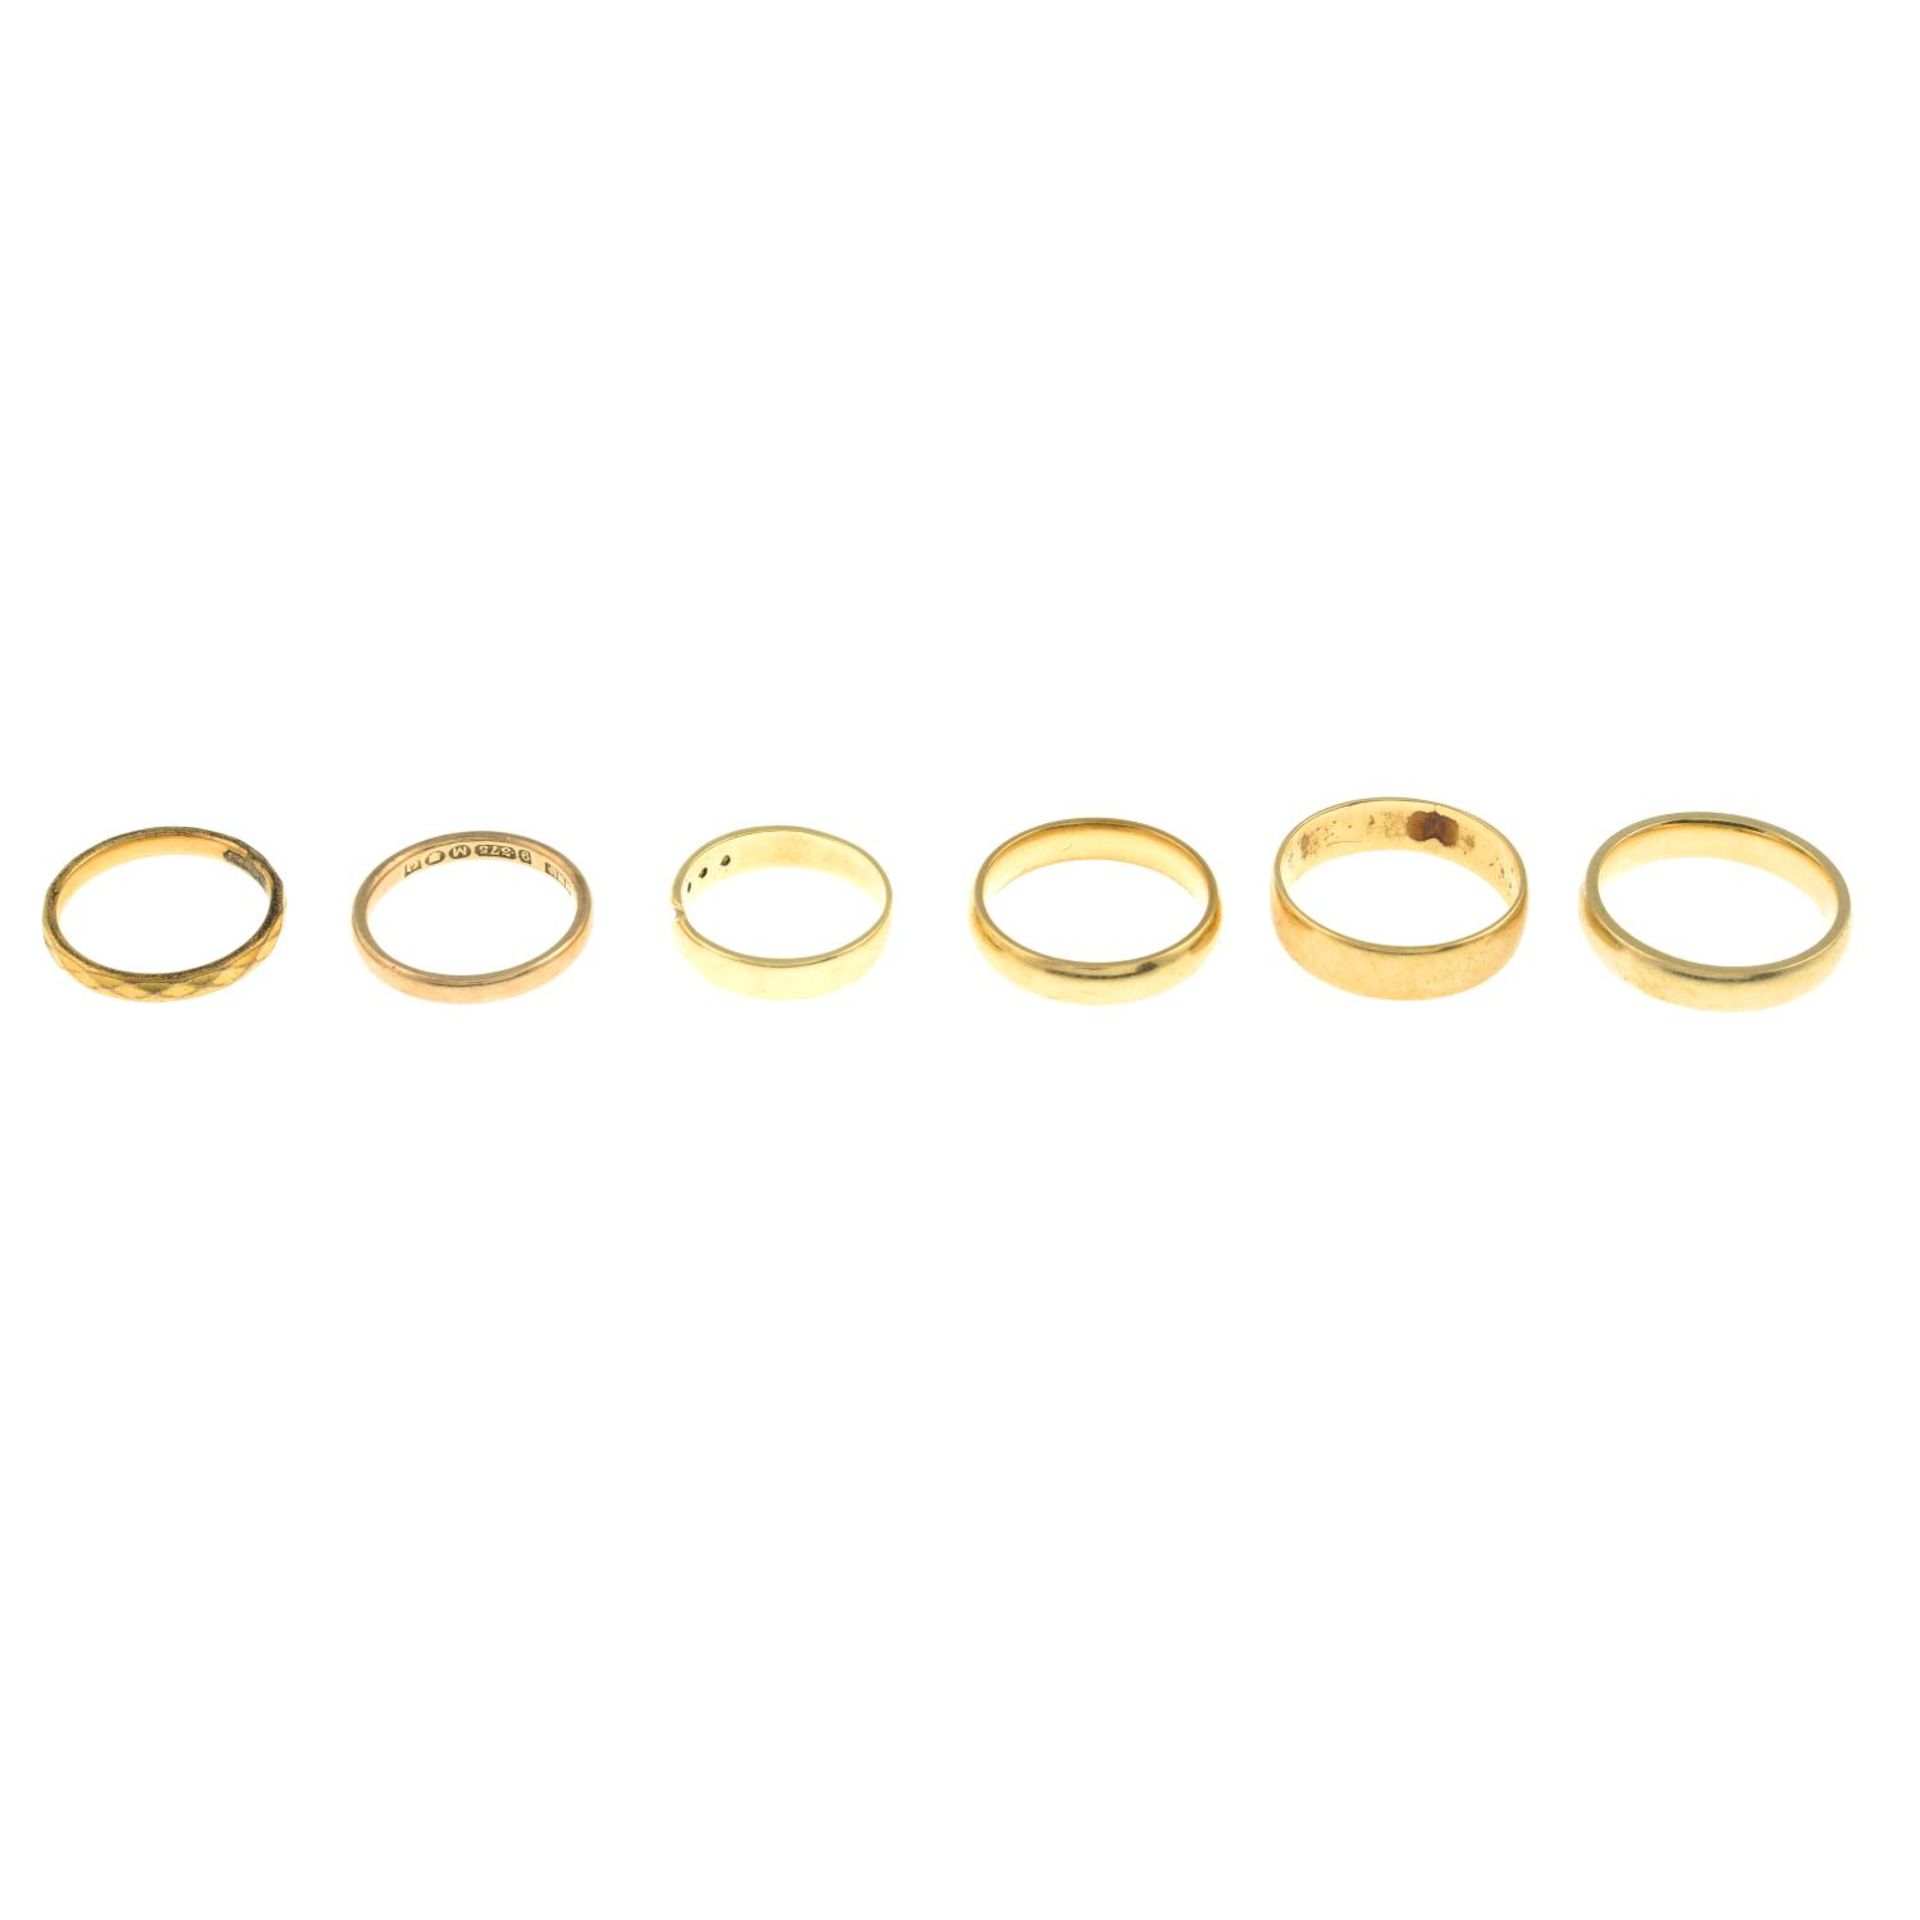 Four 9ct gold band rings, hallmarks for 9ct gold, ring sizes K to P, 12.4gms.